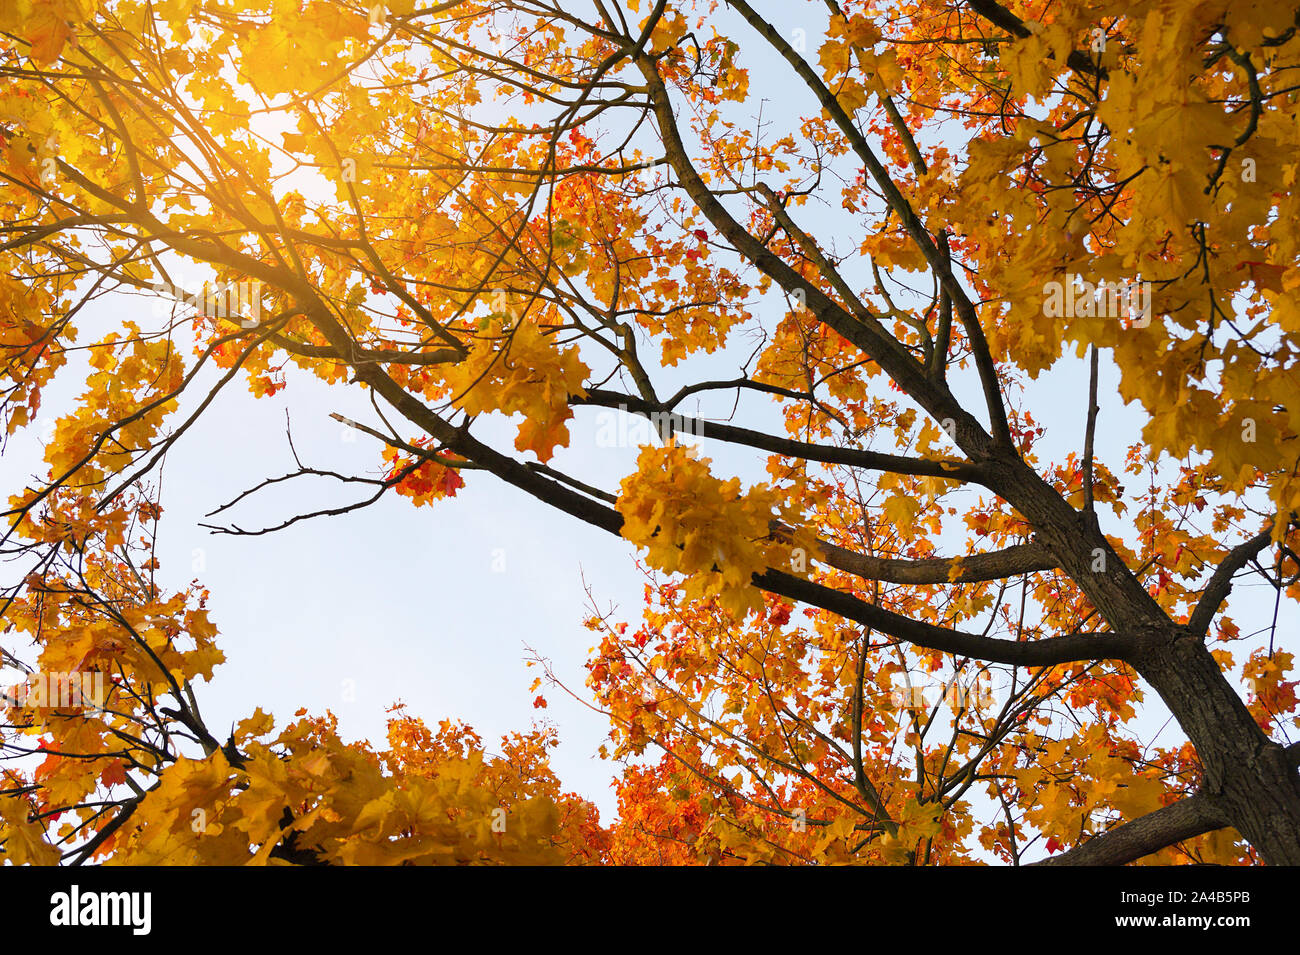 Autumn leaves on maple tree branches against blue sky. Stock Photo